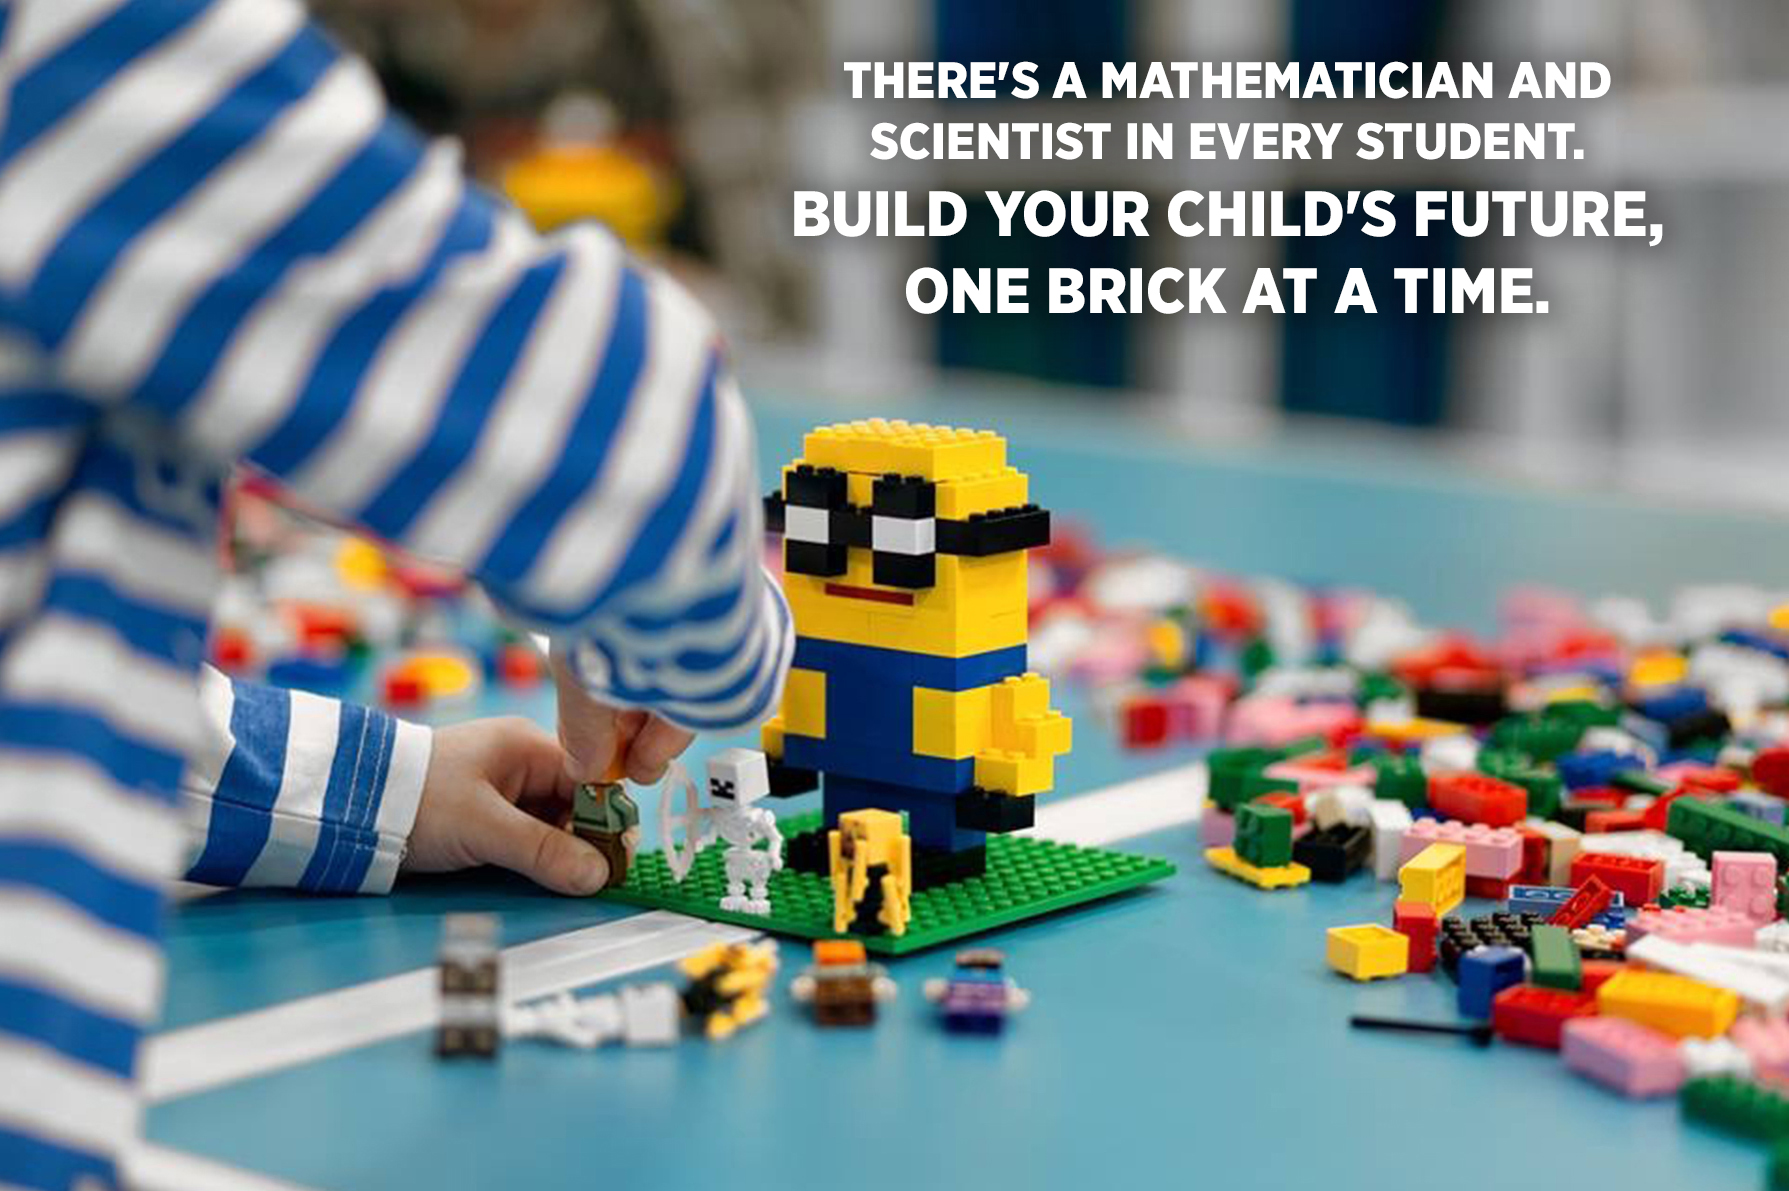 Bricks 4 Kidz Kids Franchise We Learn We Build We Play With Lego Bricks - what you can benefit from roblox games rathfrilandmotorclub